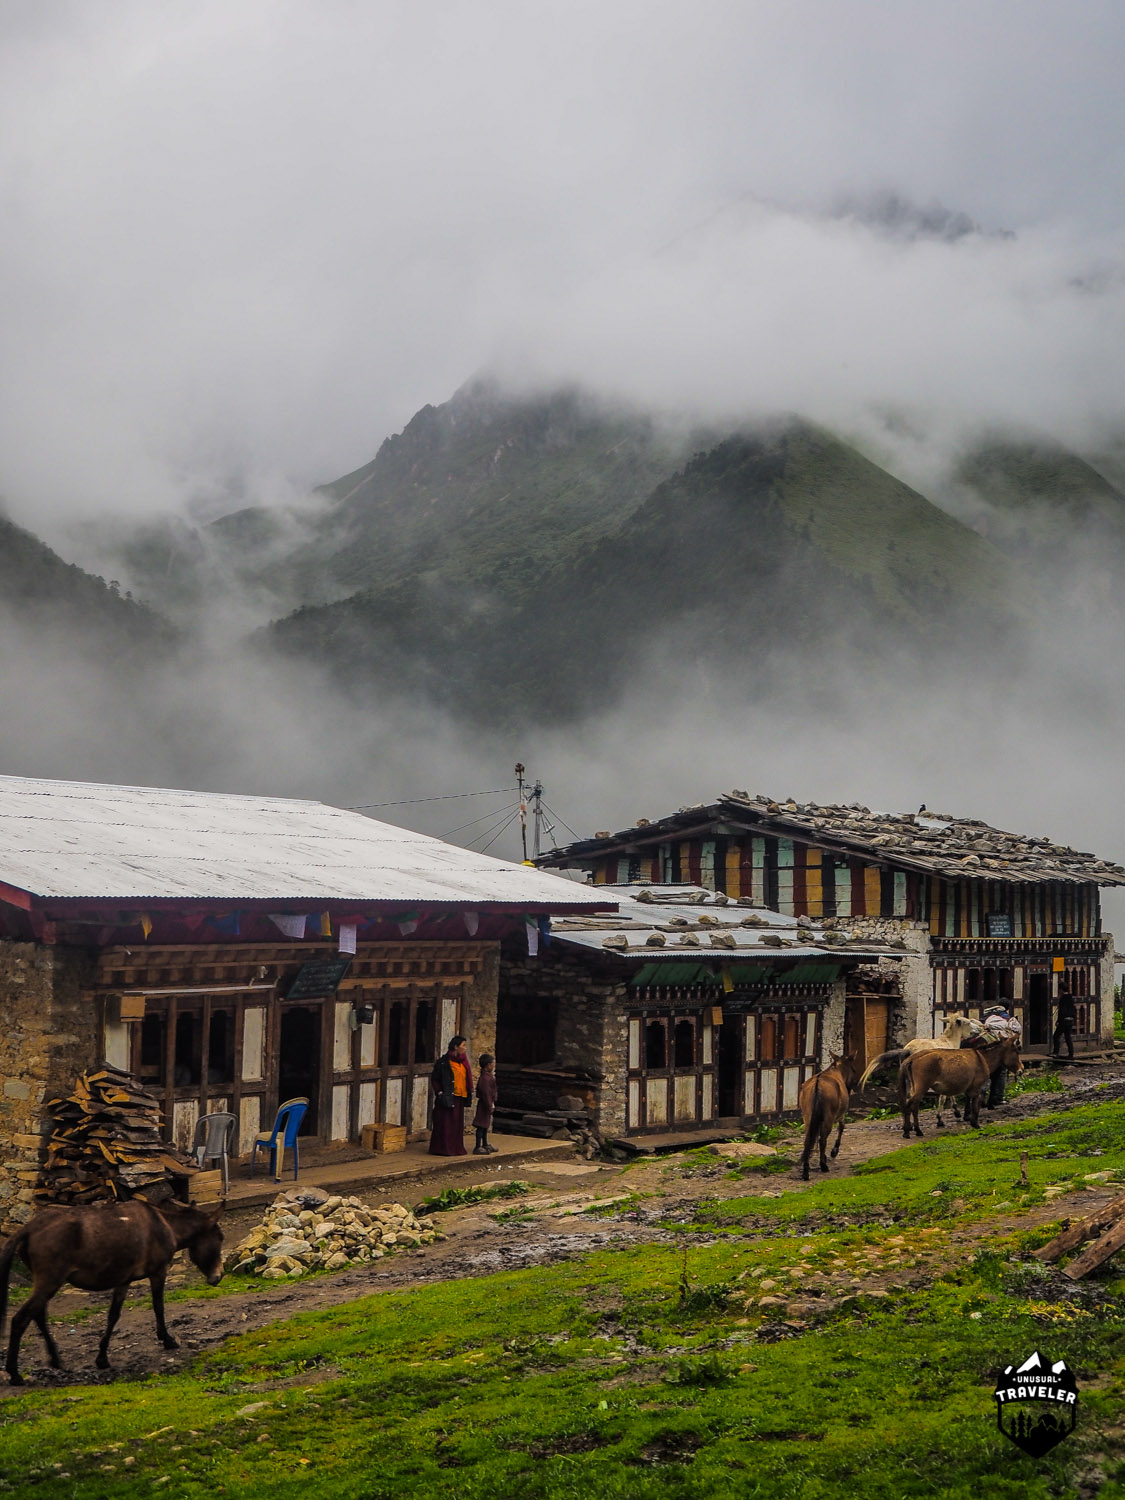 In far north Bhutan, here in Laya is the traffic by horses, no cars up here. The 3 buildings are all local bars